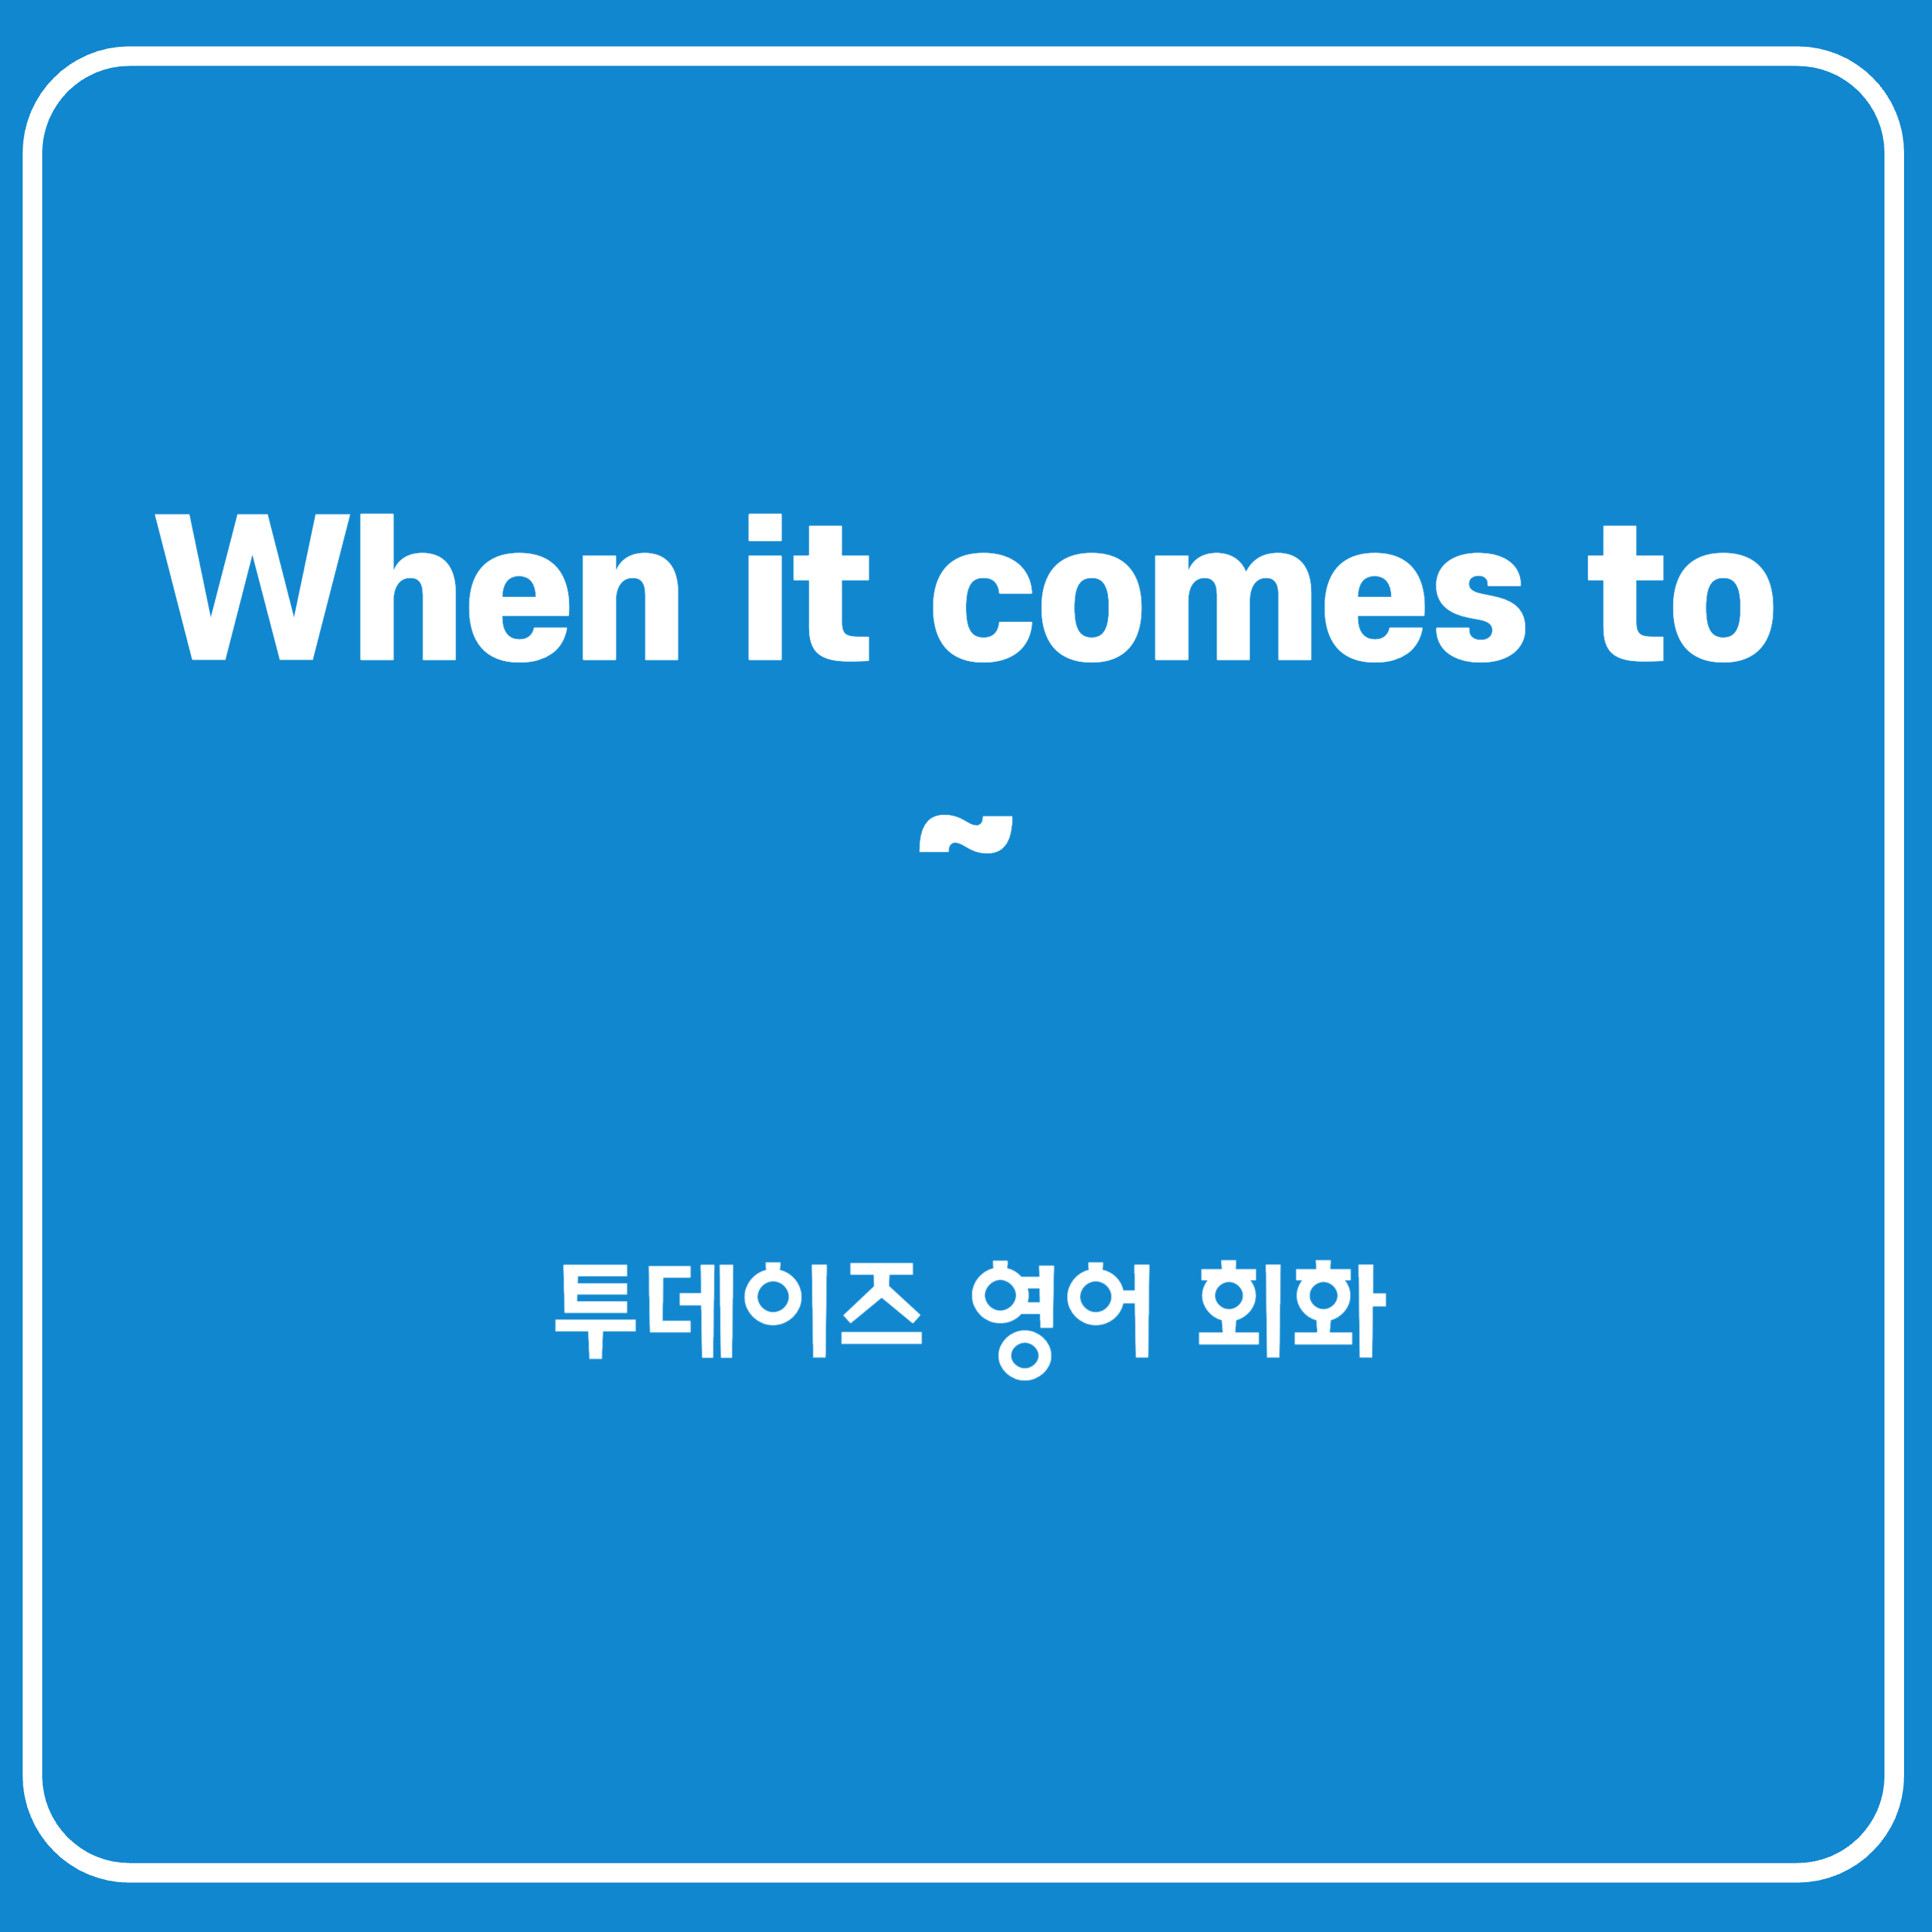 when it comes to&#44; as~as 평소 쉽게 쓰시나요?